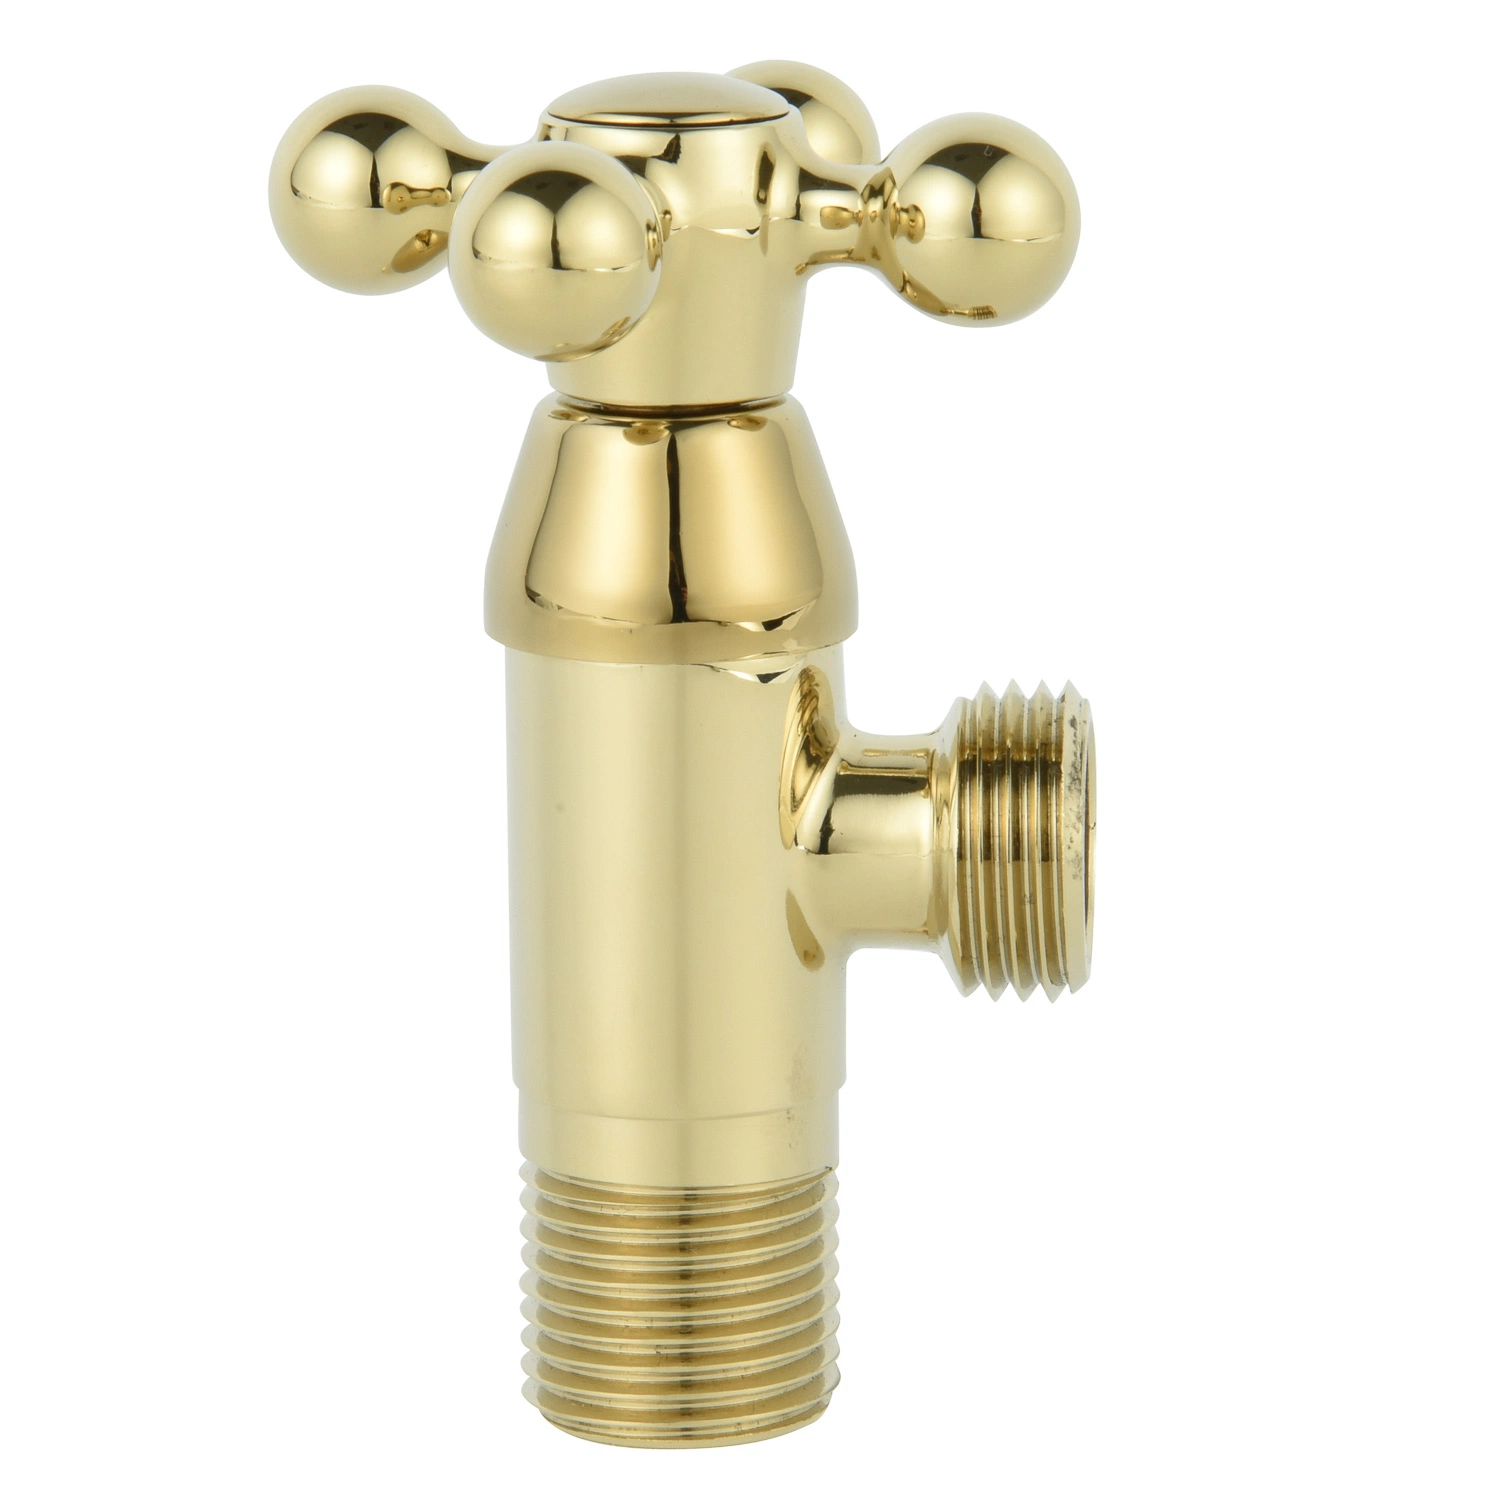 Toilet Angle Valve Bathroom Accessories with Gold Polish